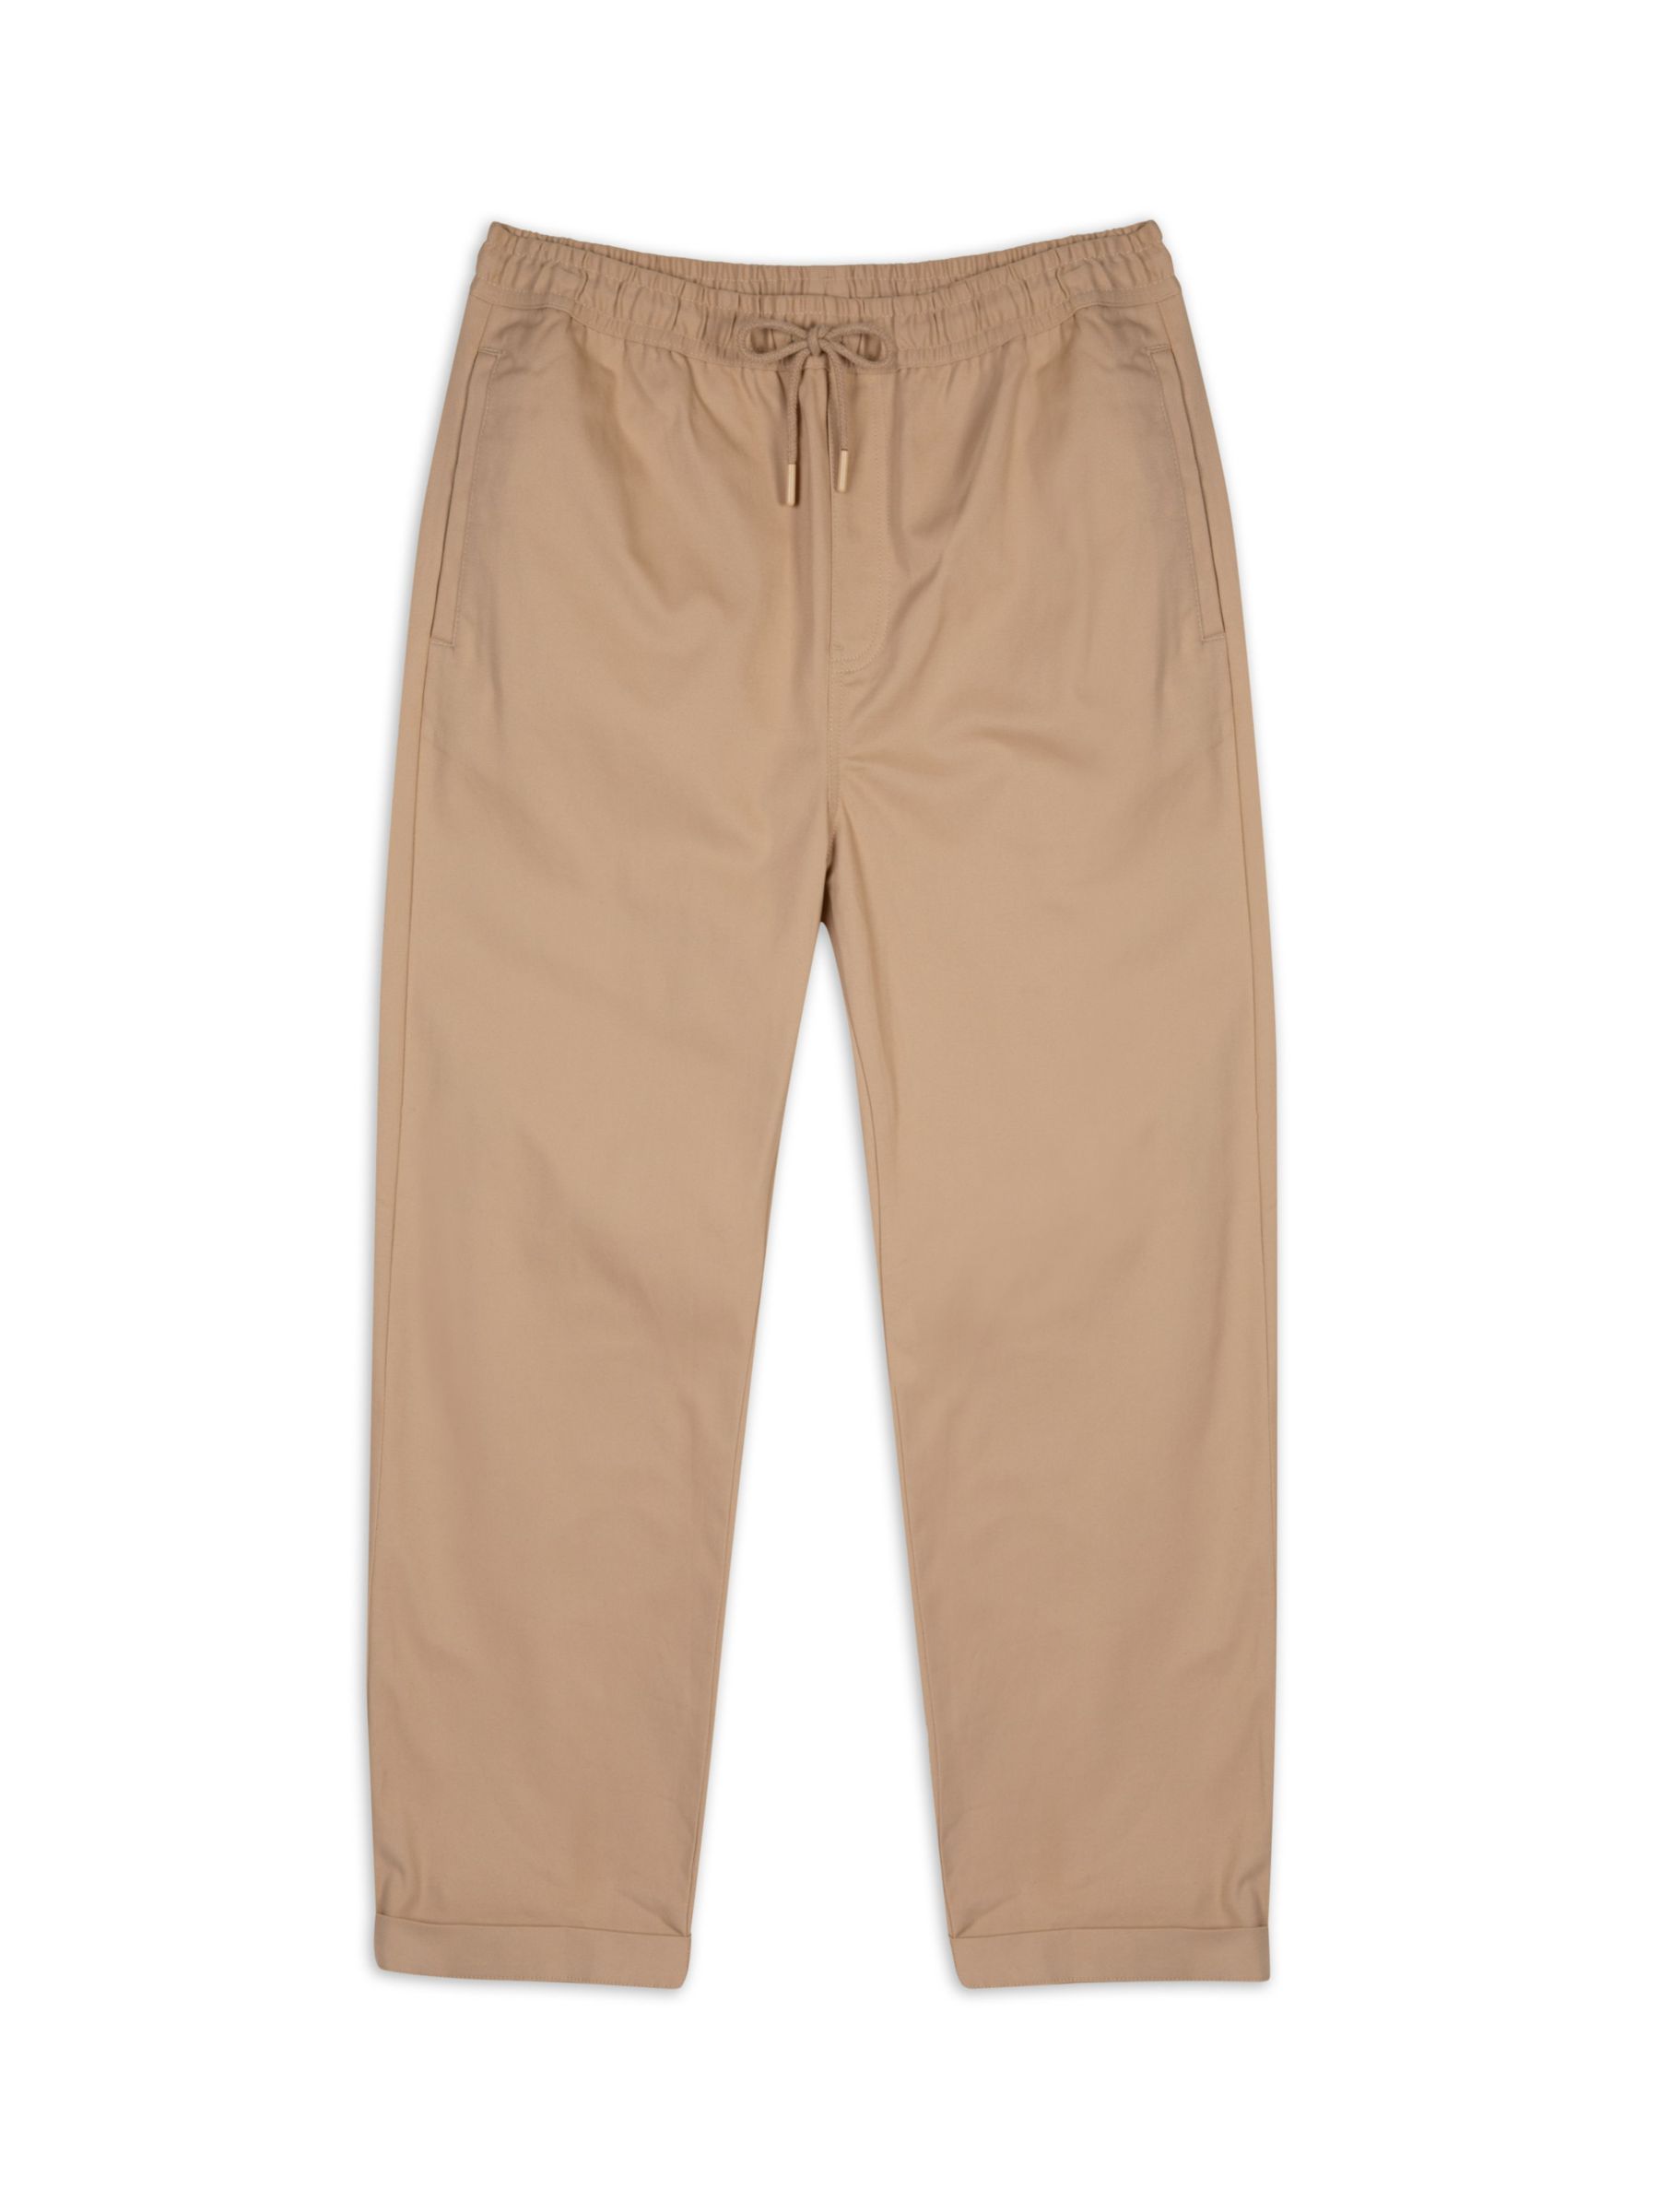 Chelsea Peers Cotton Relaxed Chinos, Camel, L